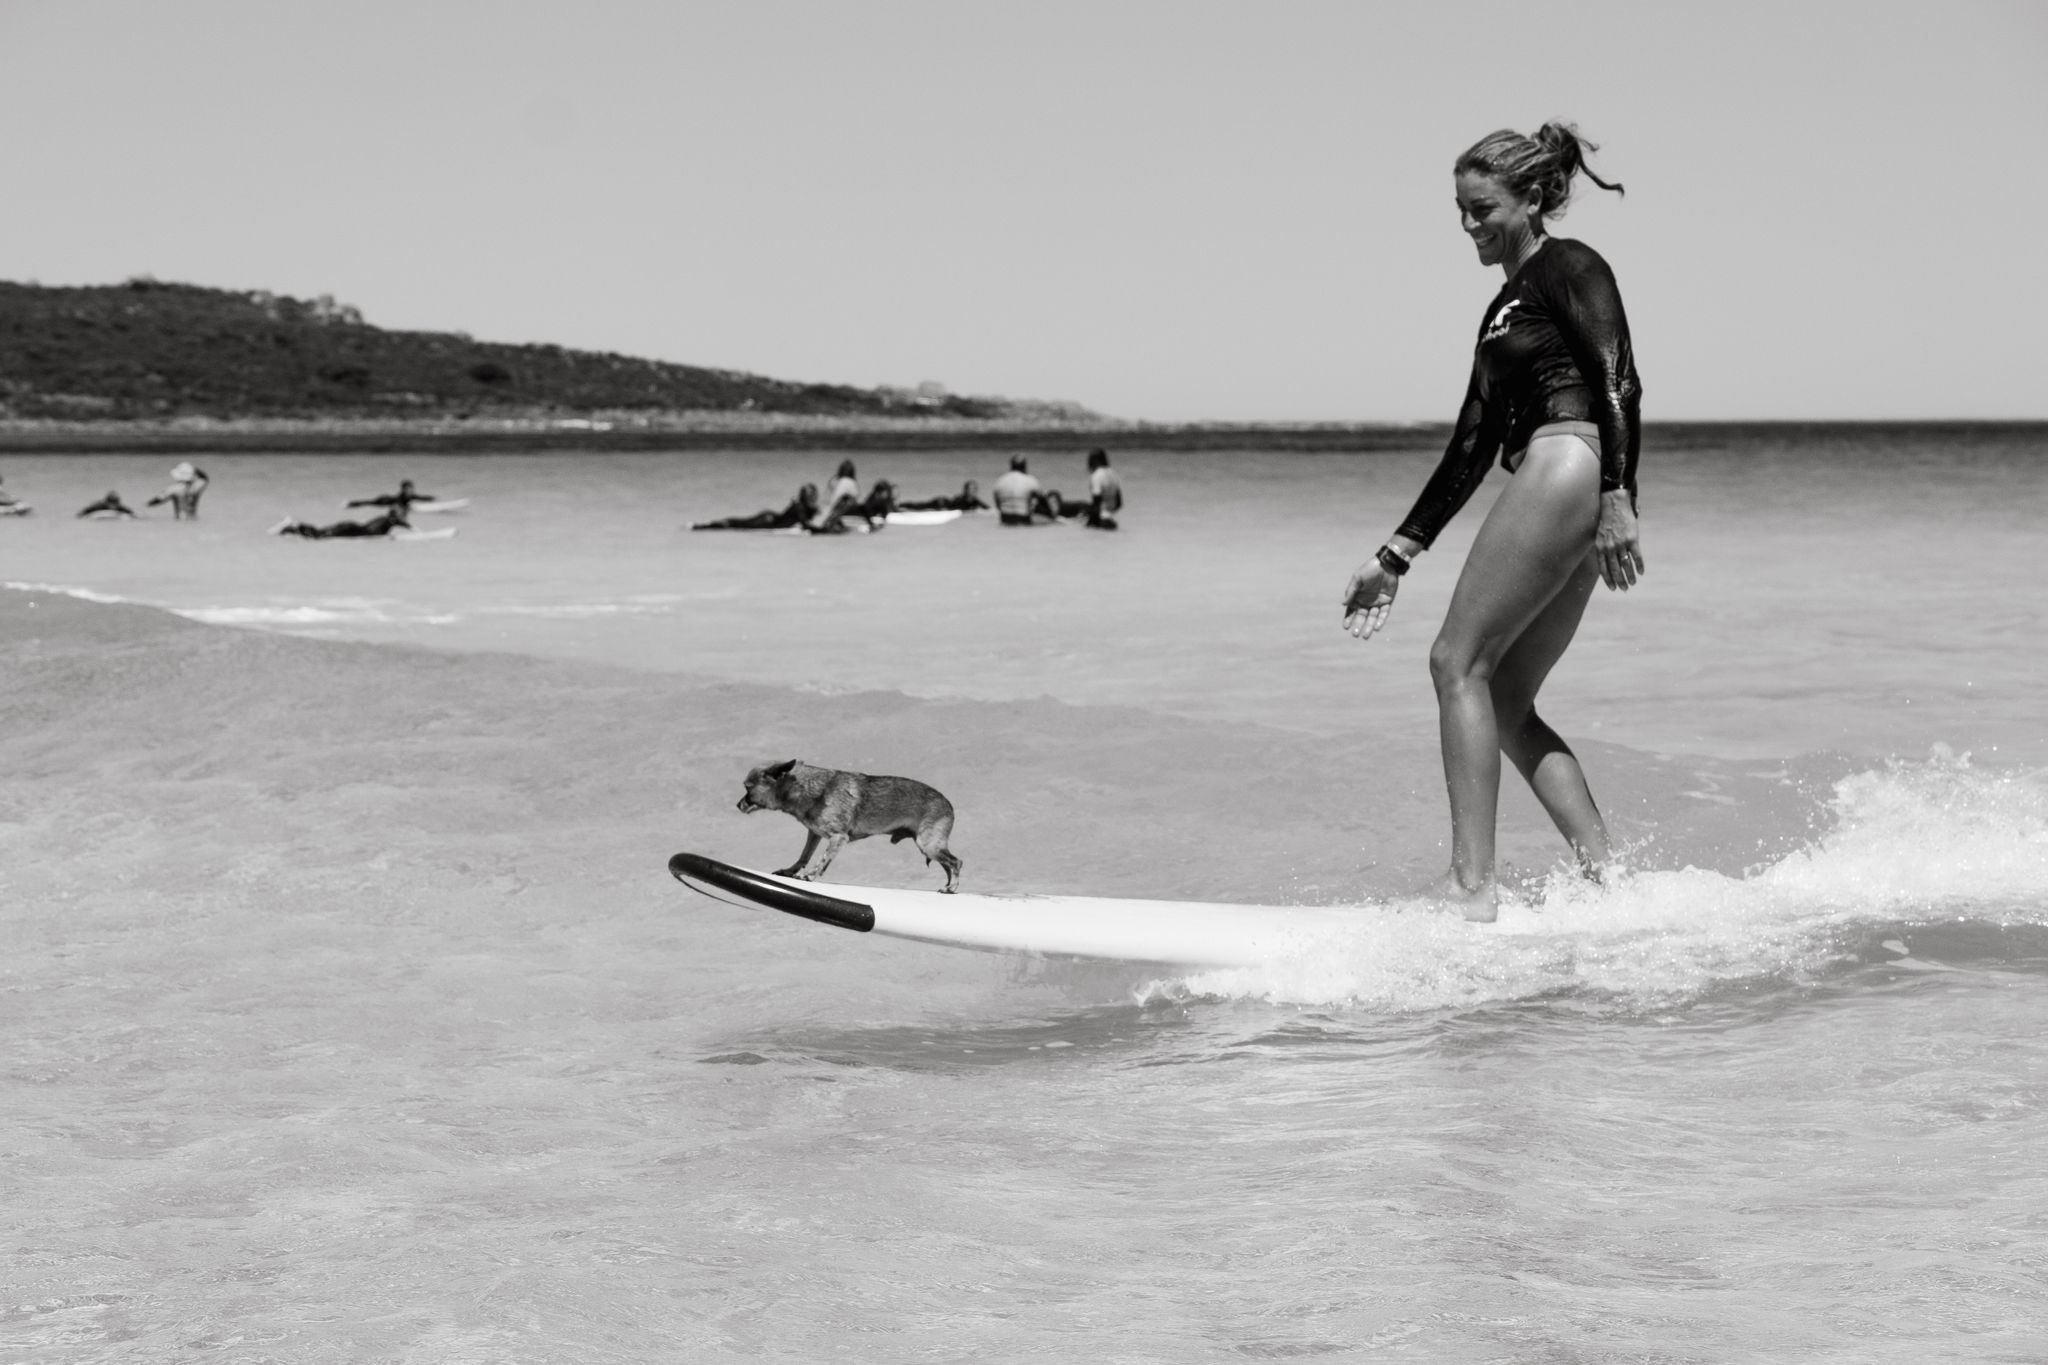 Crystal from Yallingup Surf School surfing with her dog at Smiths Beach. Photo credit Rachel Claire